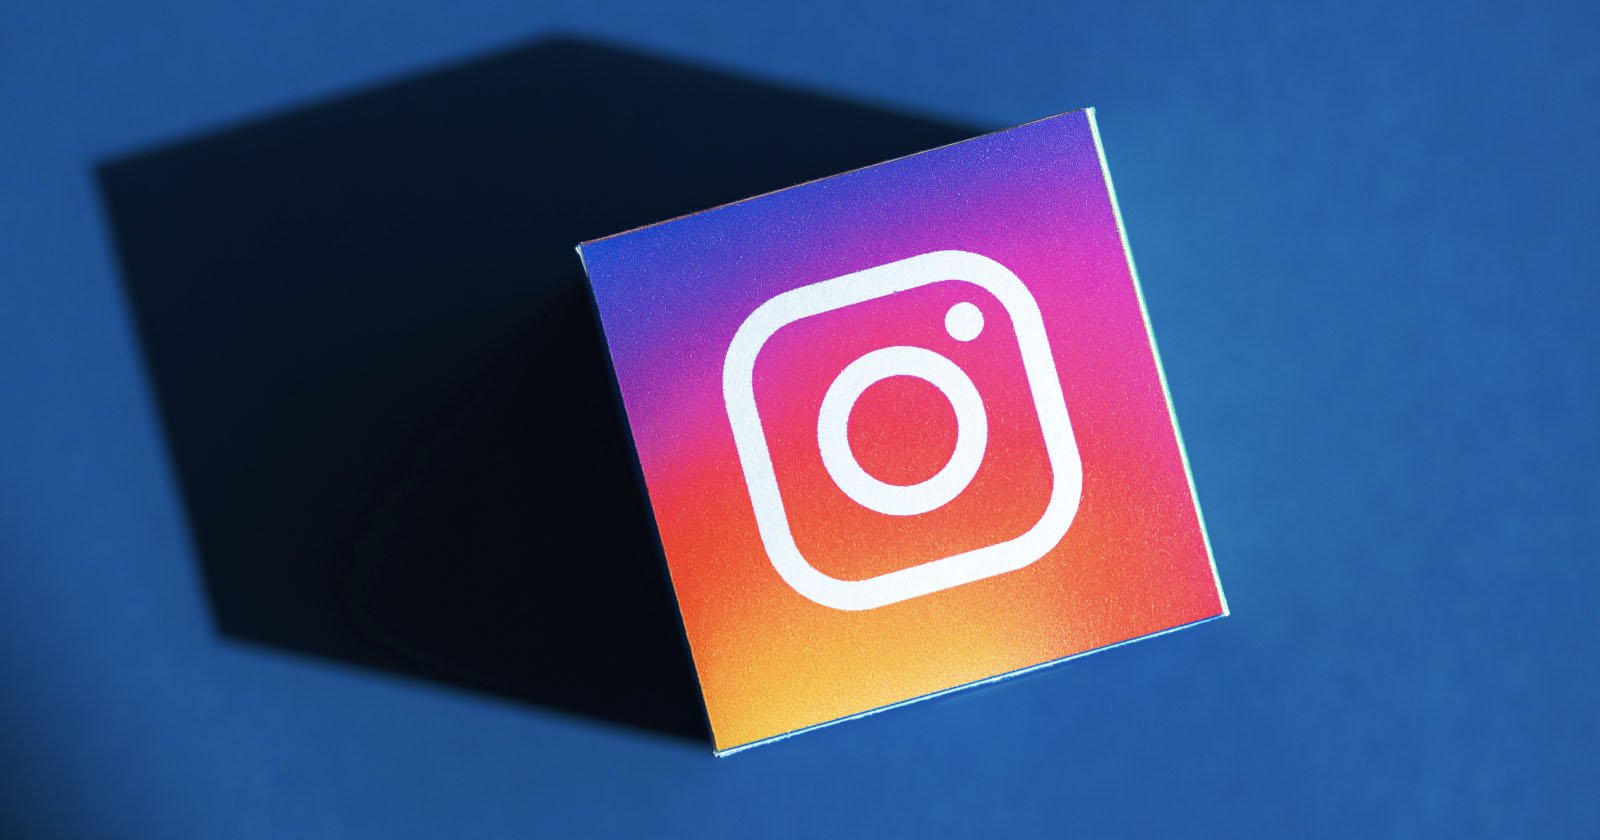 Instagram on a Cube